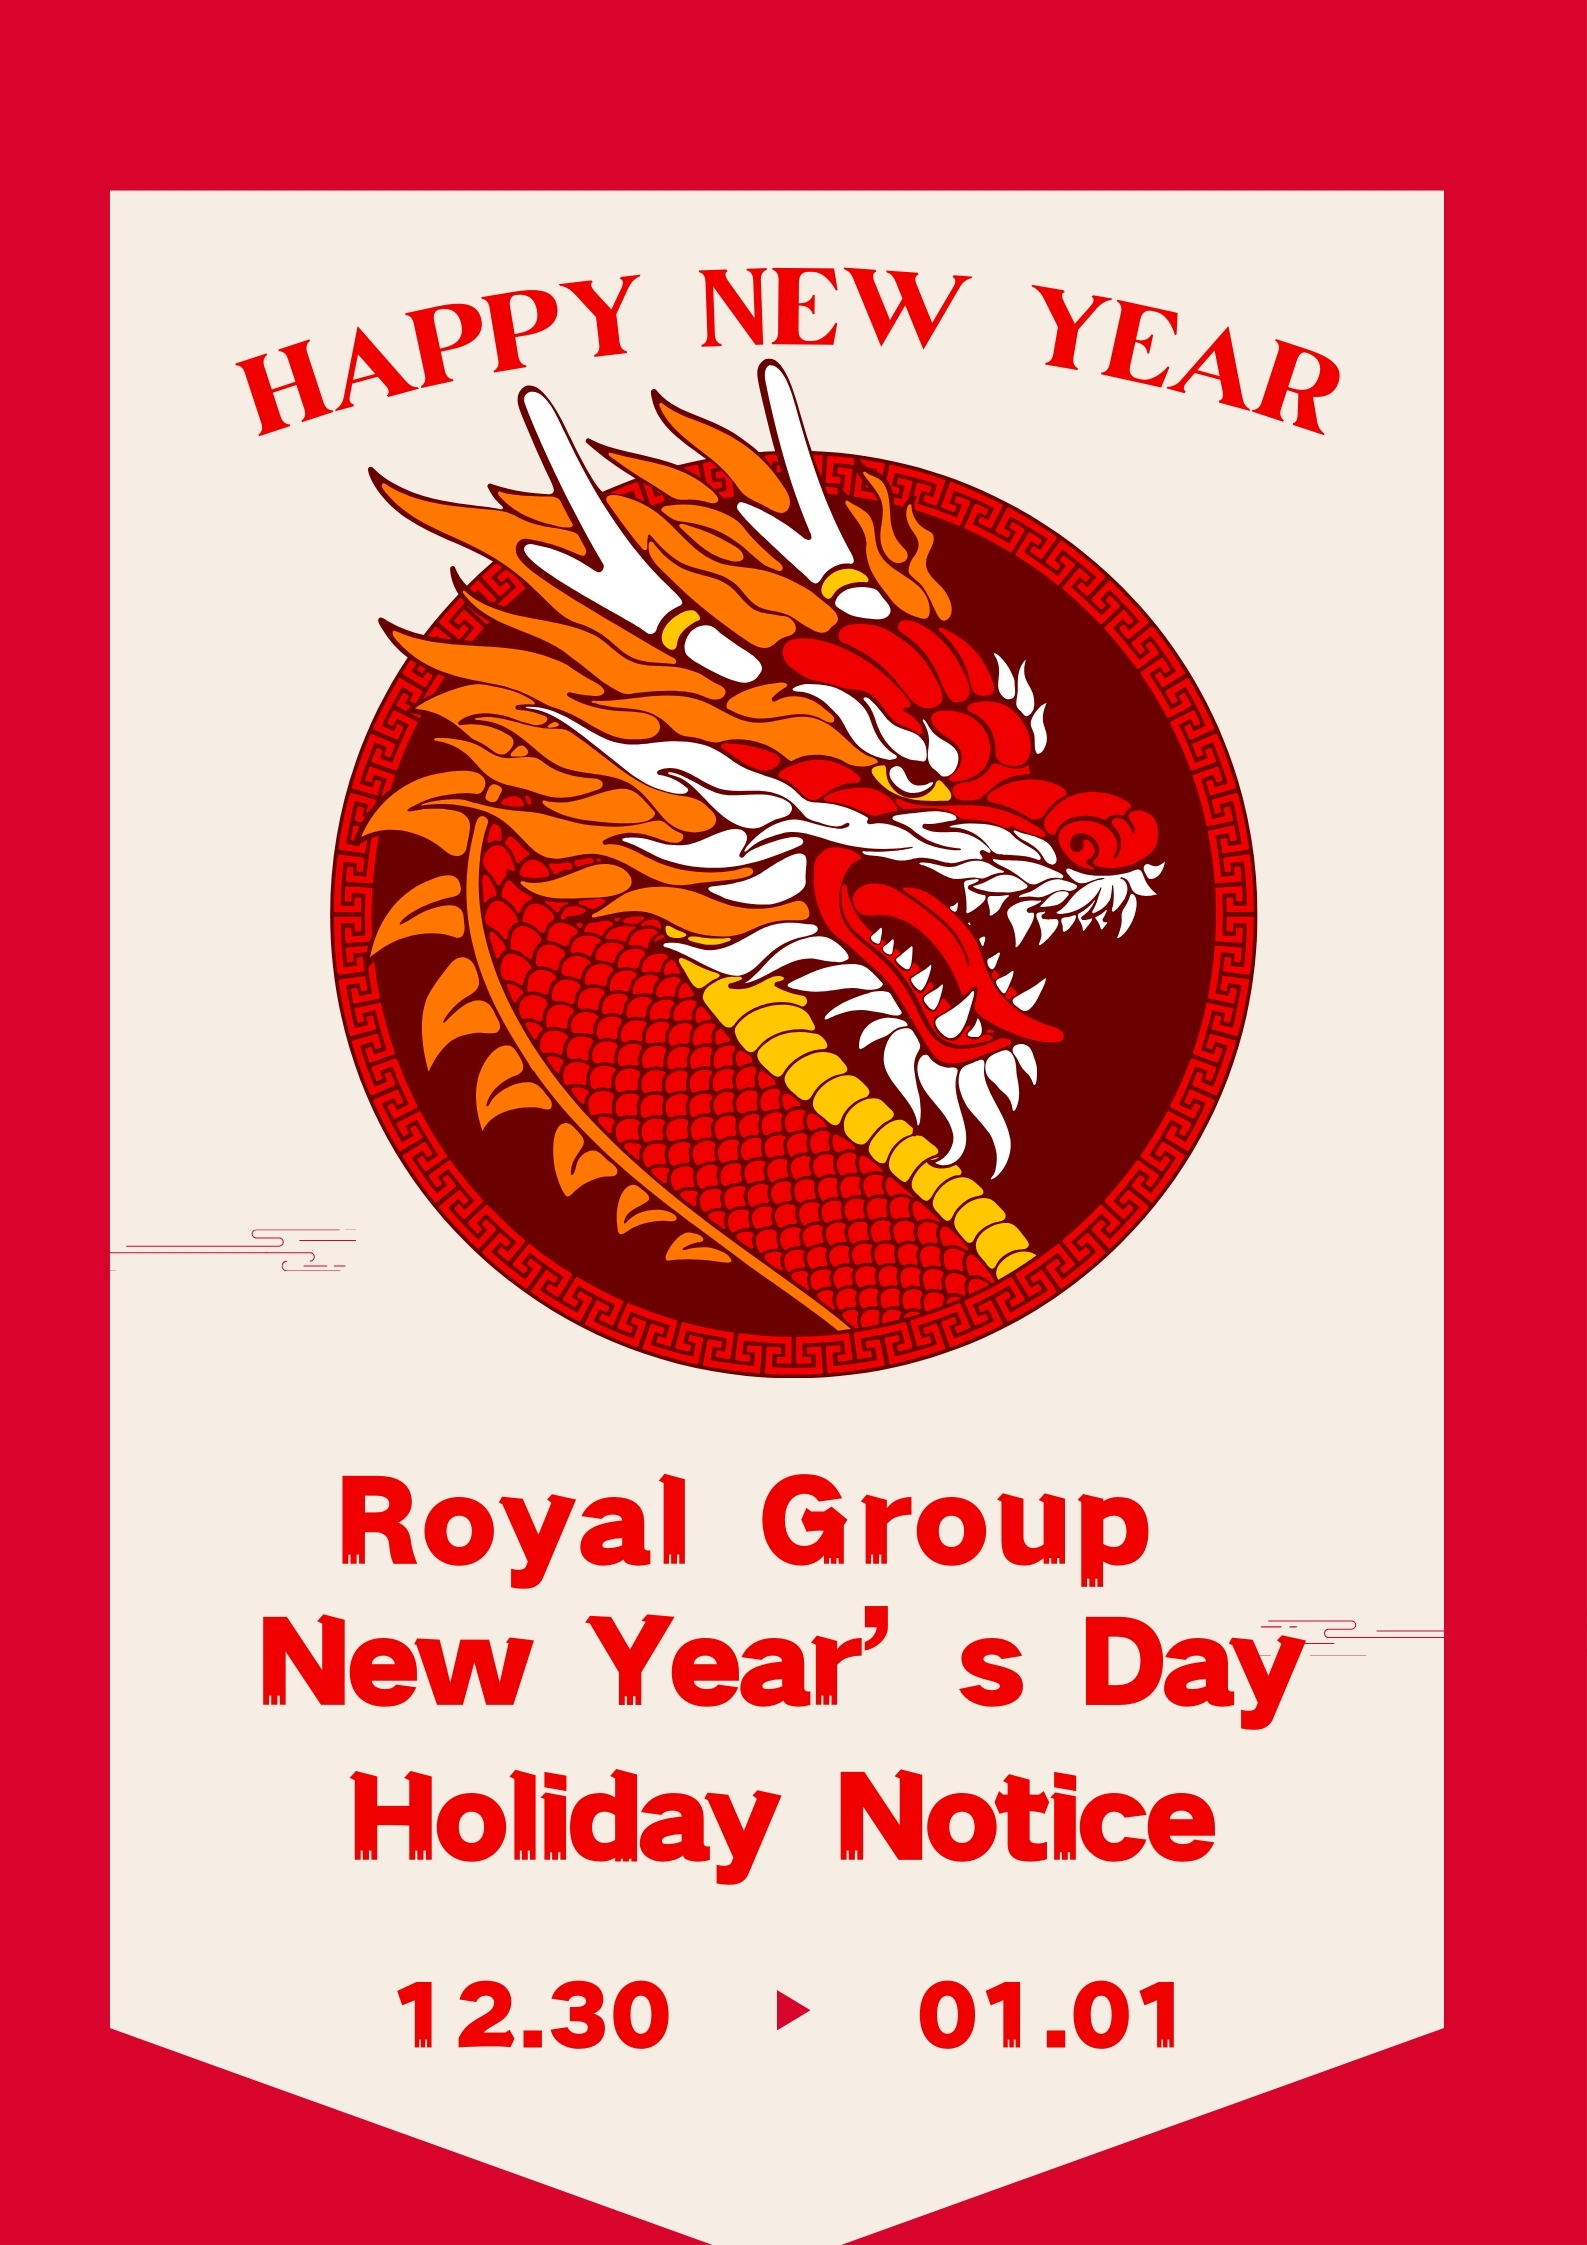 Royal Group New Year’s Day Holiday Notice